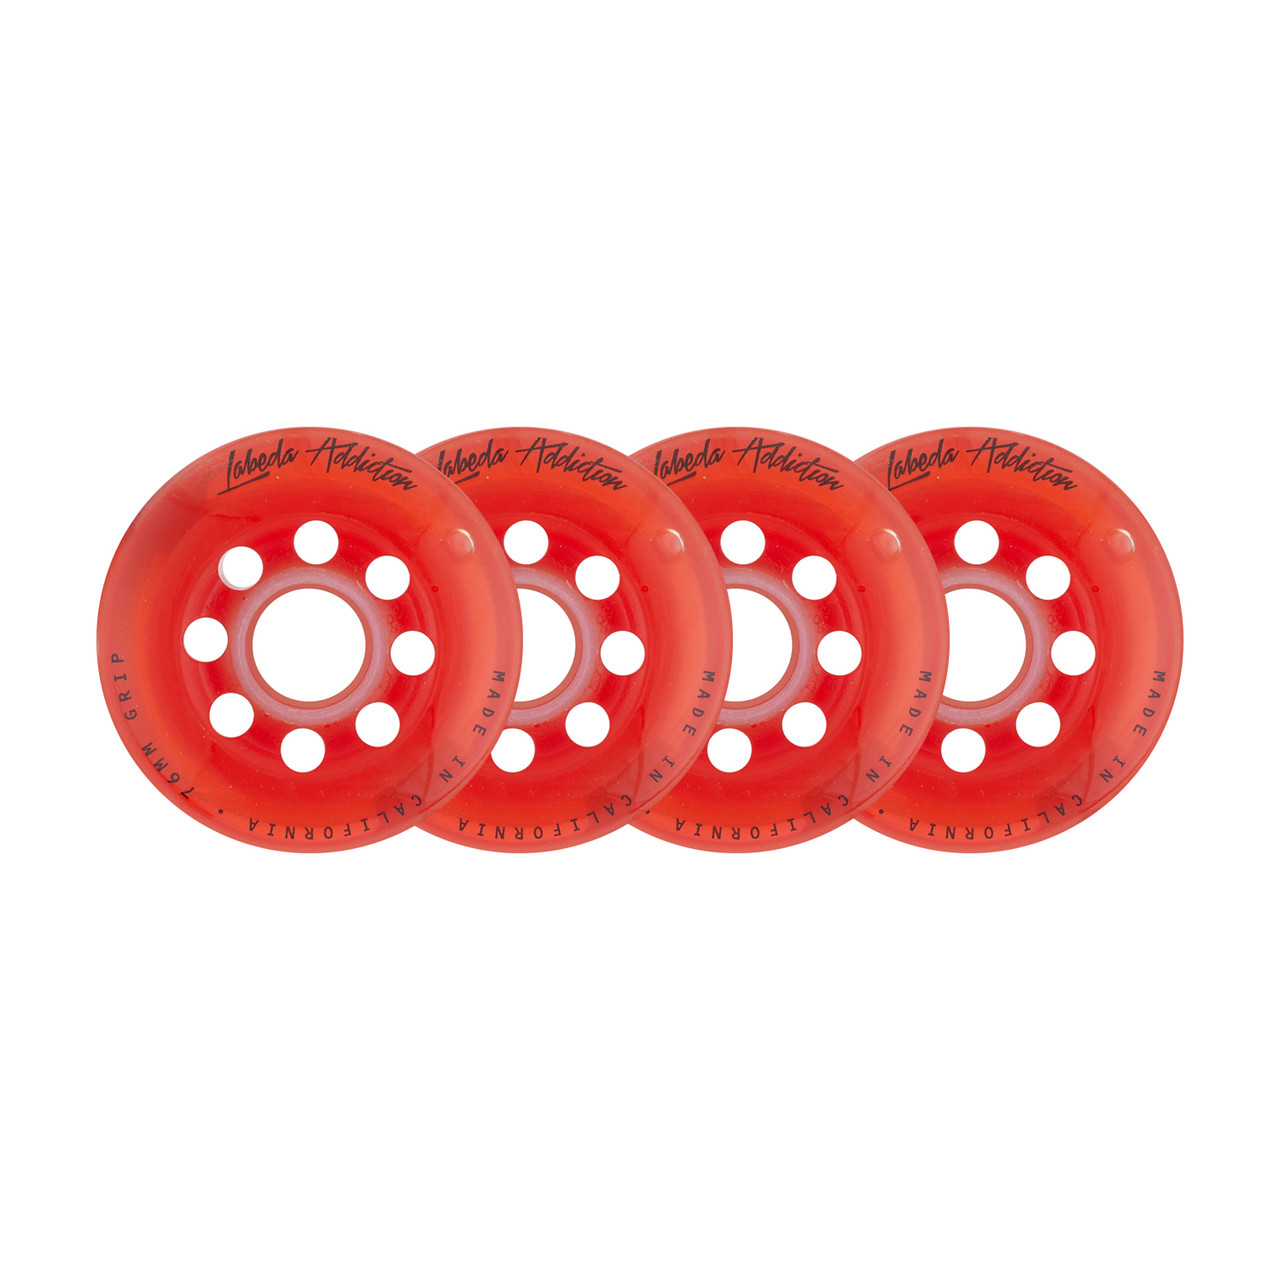 Labeda Addiction Red 76mm 